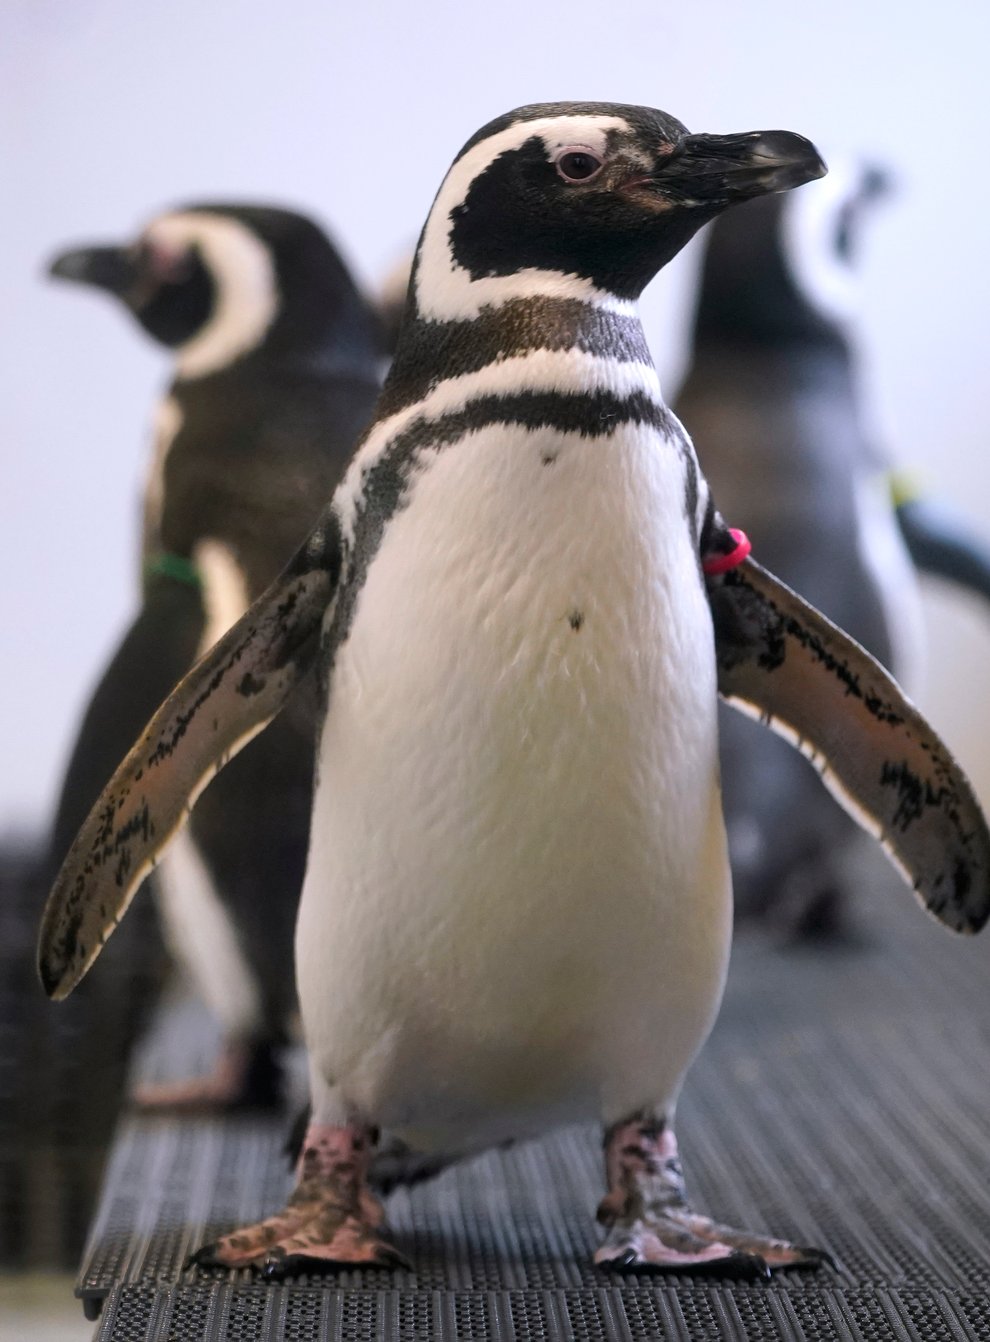 Magellan penguins stand in their enclosure at the Blank Park Zoo (Charlie Neibergall/AP)